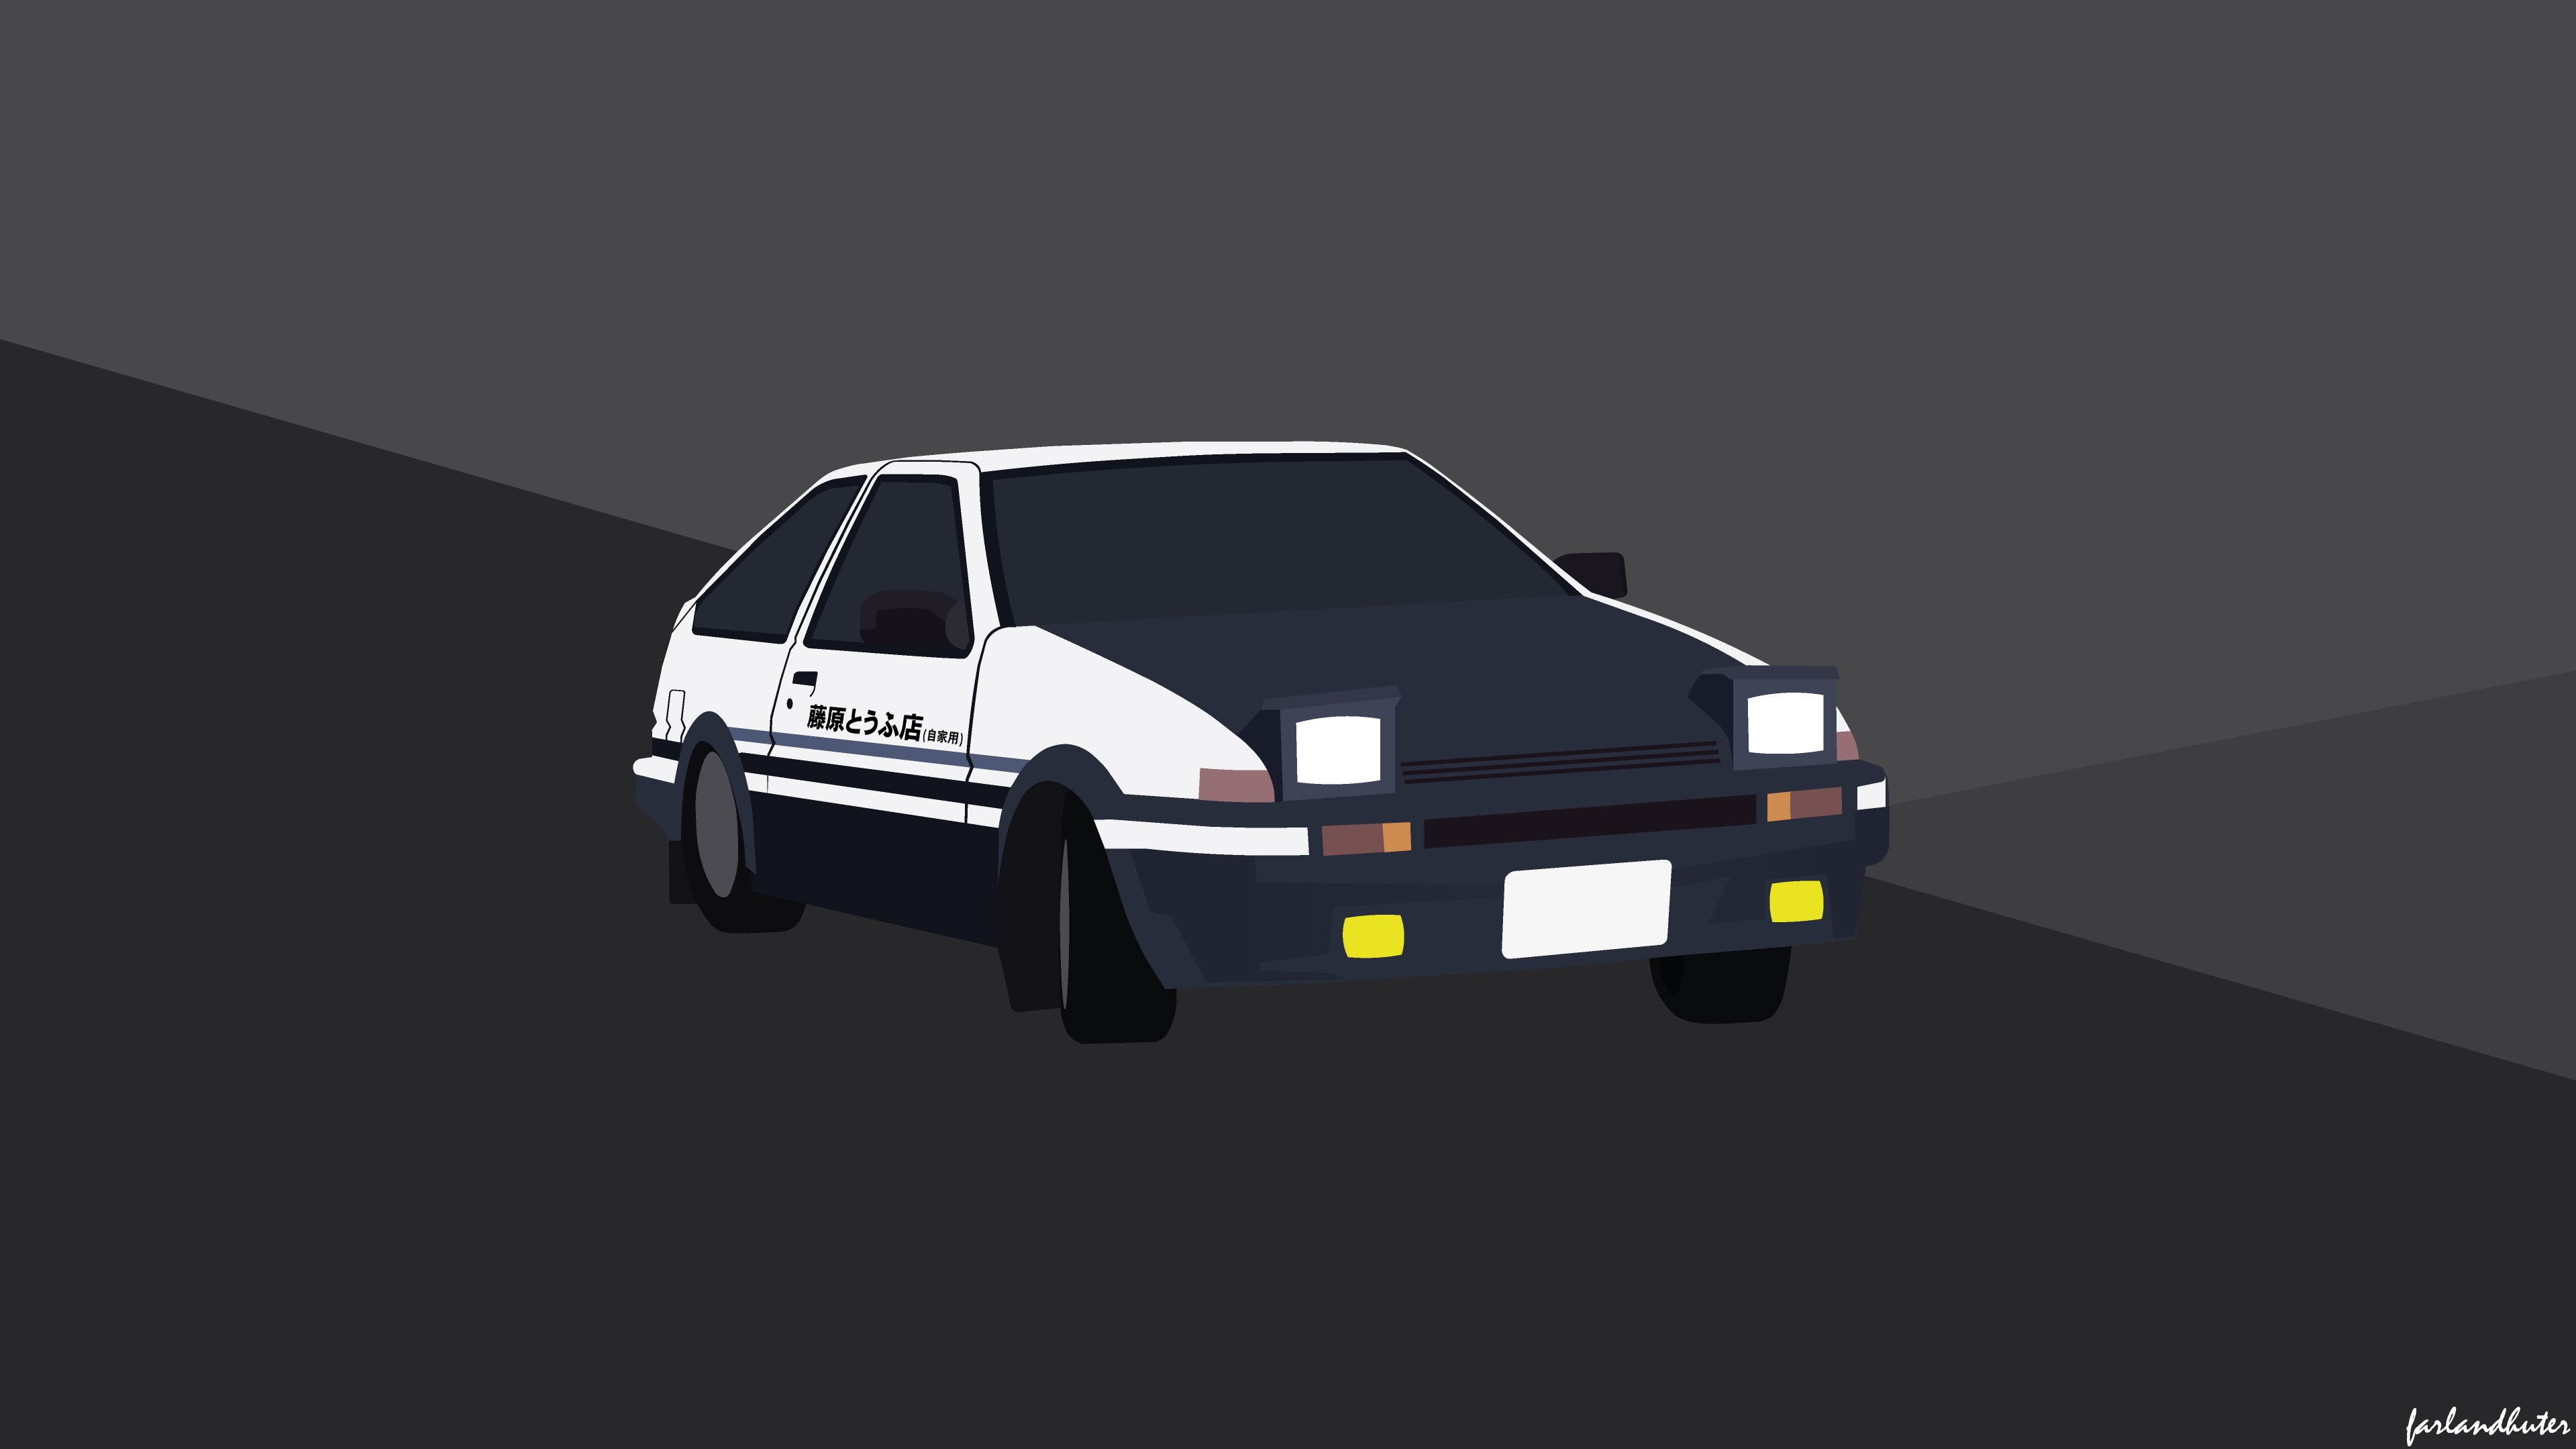 I Made a 4k Wallpaper of the AE86 From Scratch, Hope You Guys Like